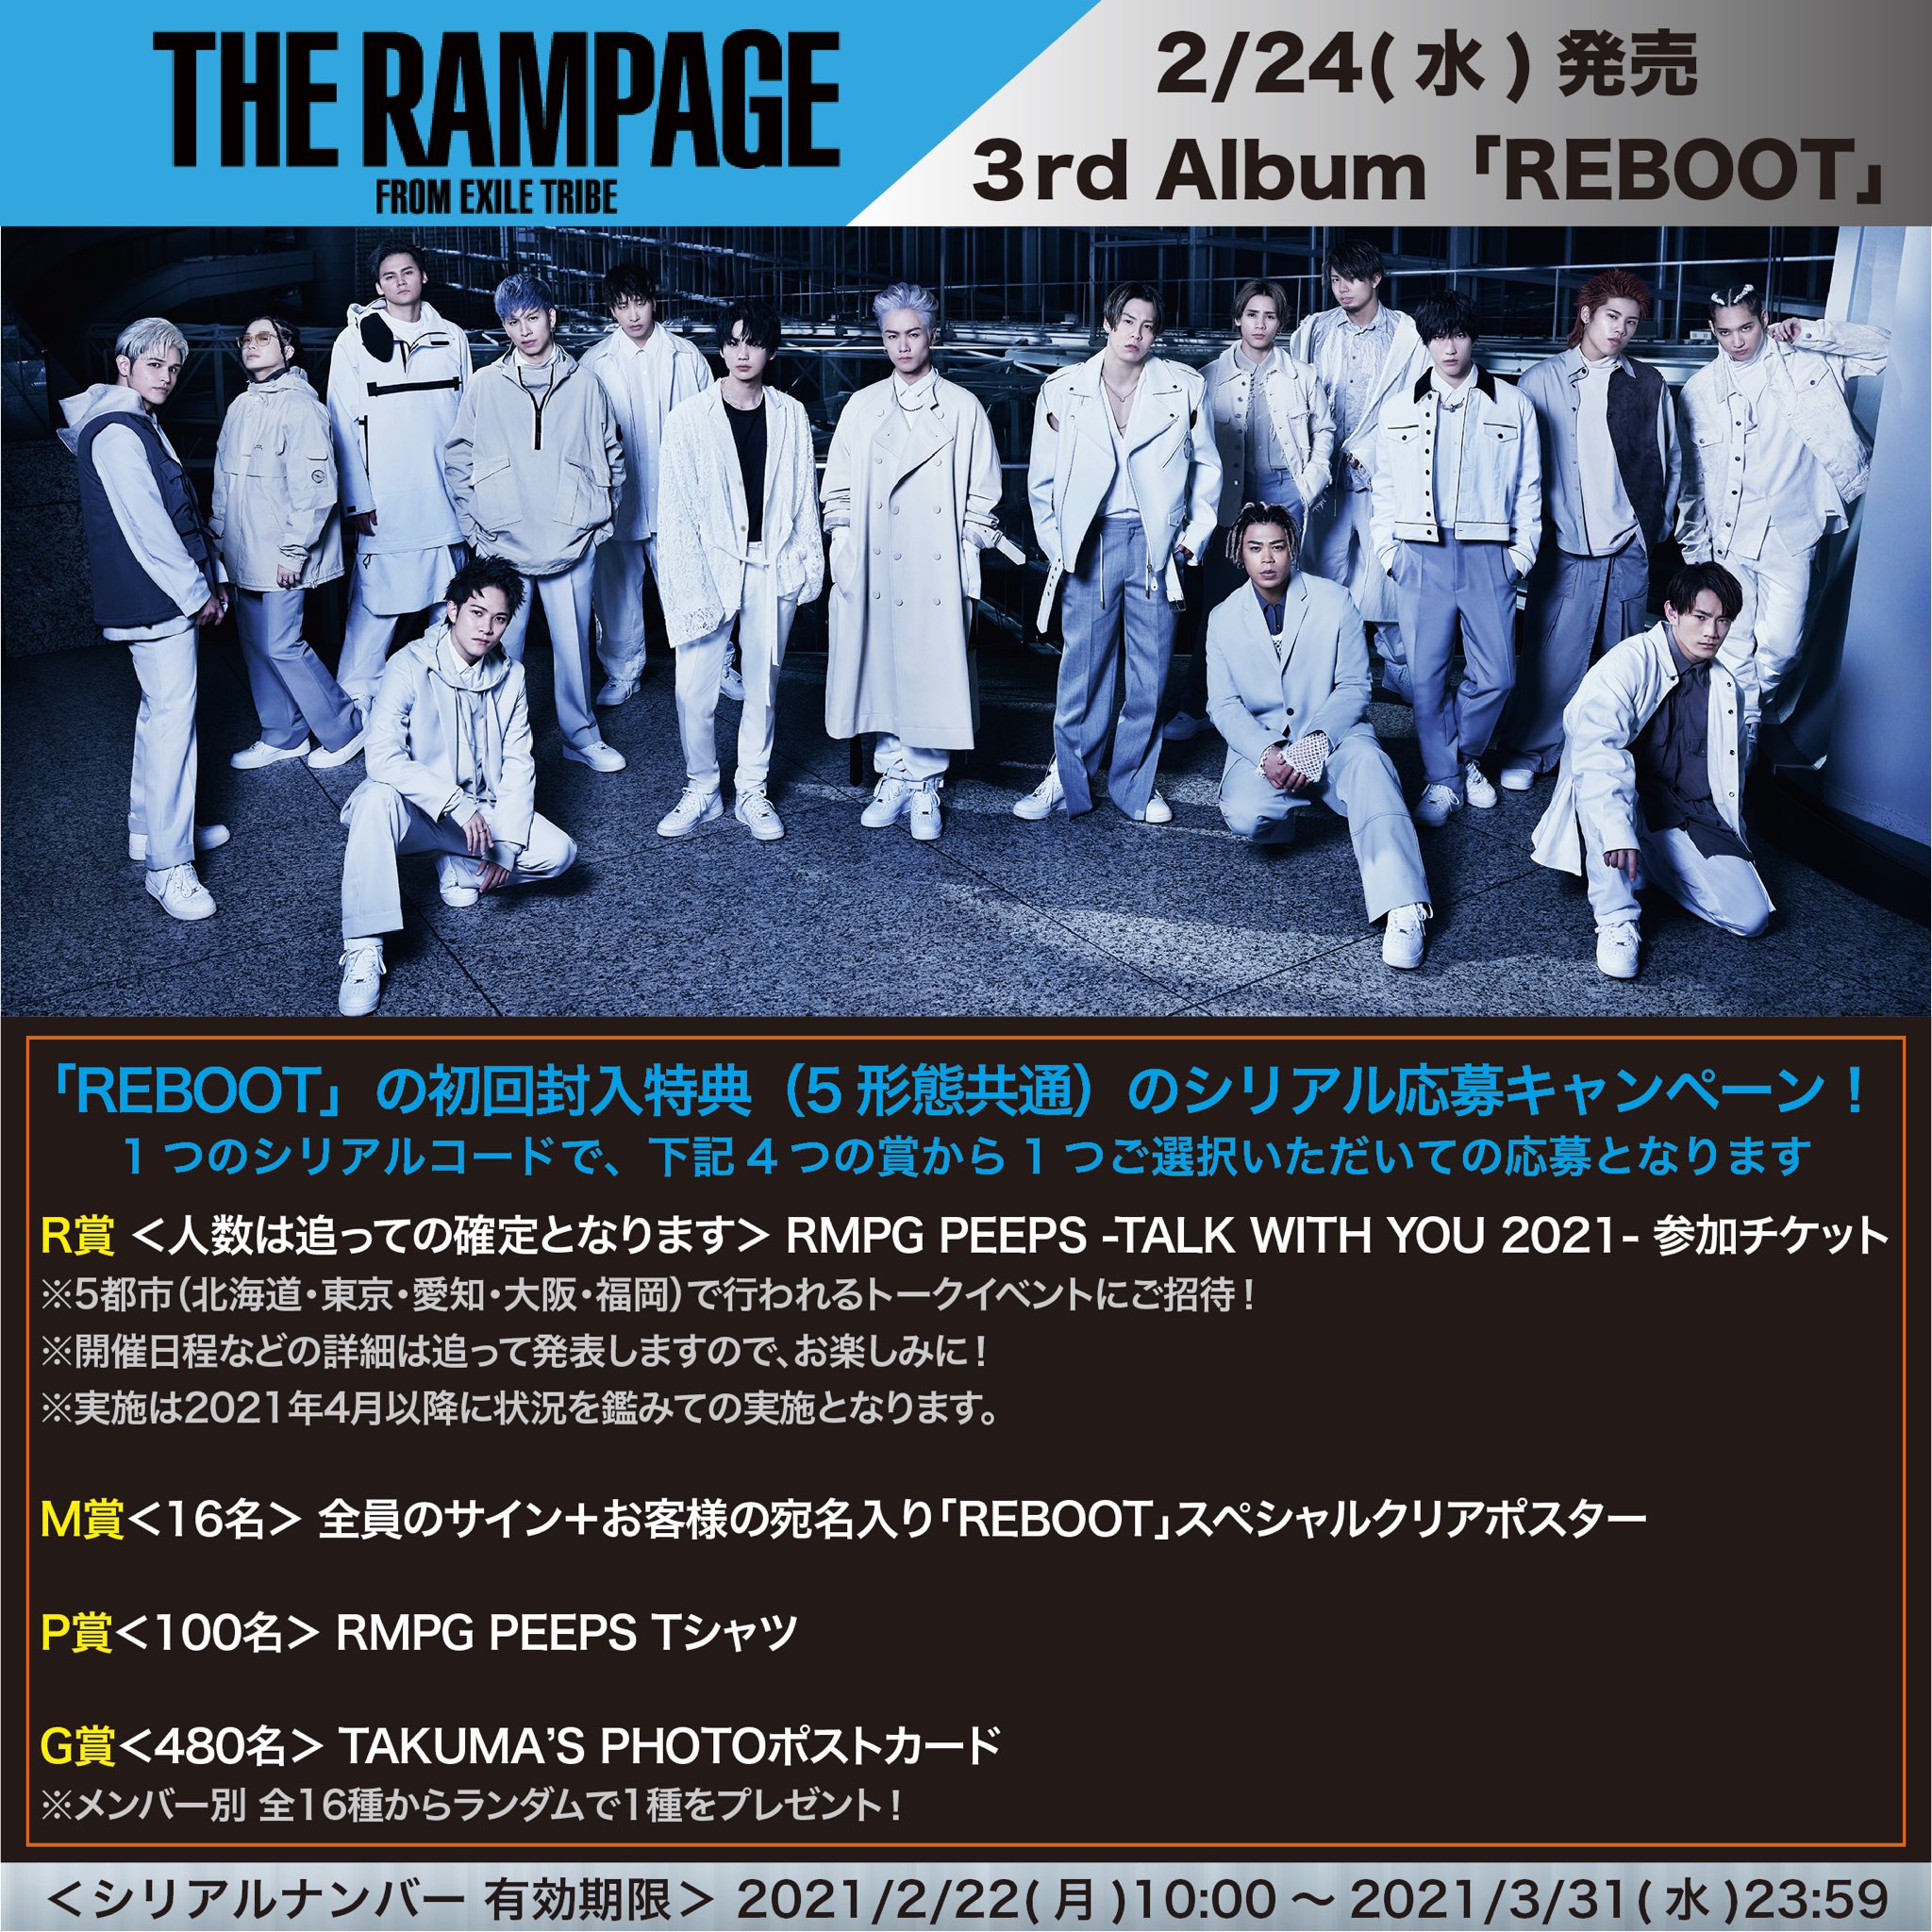 THE RAMPAGE 3rdアルバム REBOOT